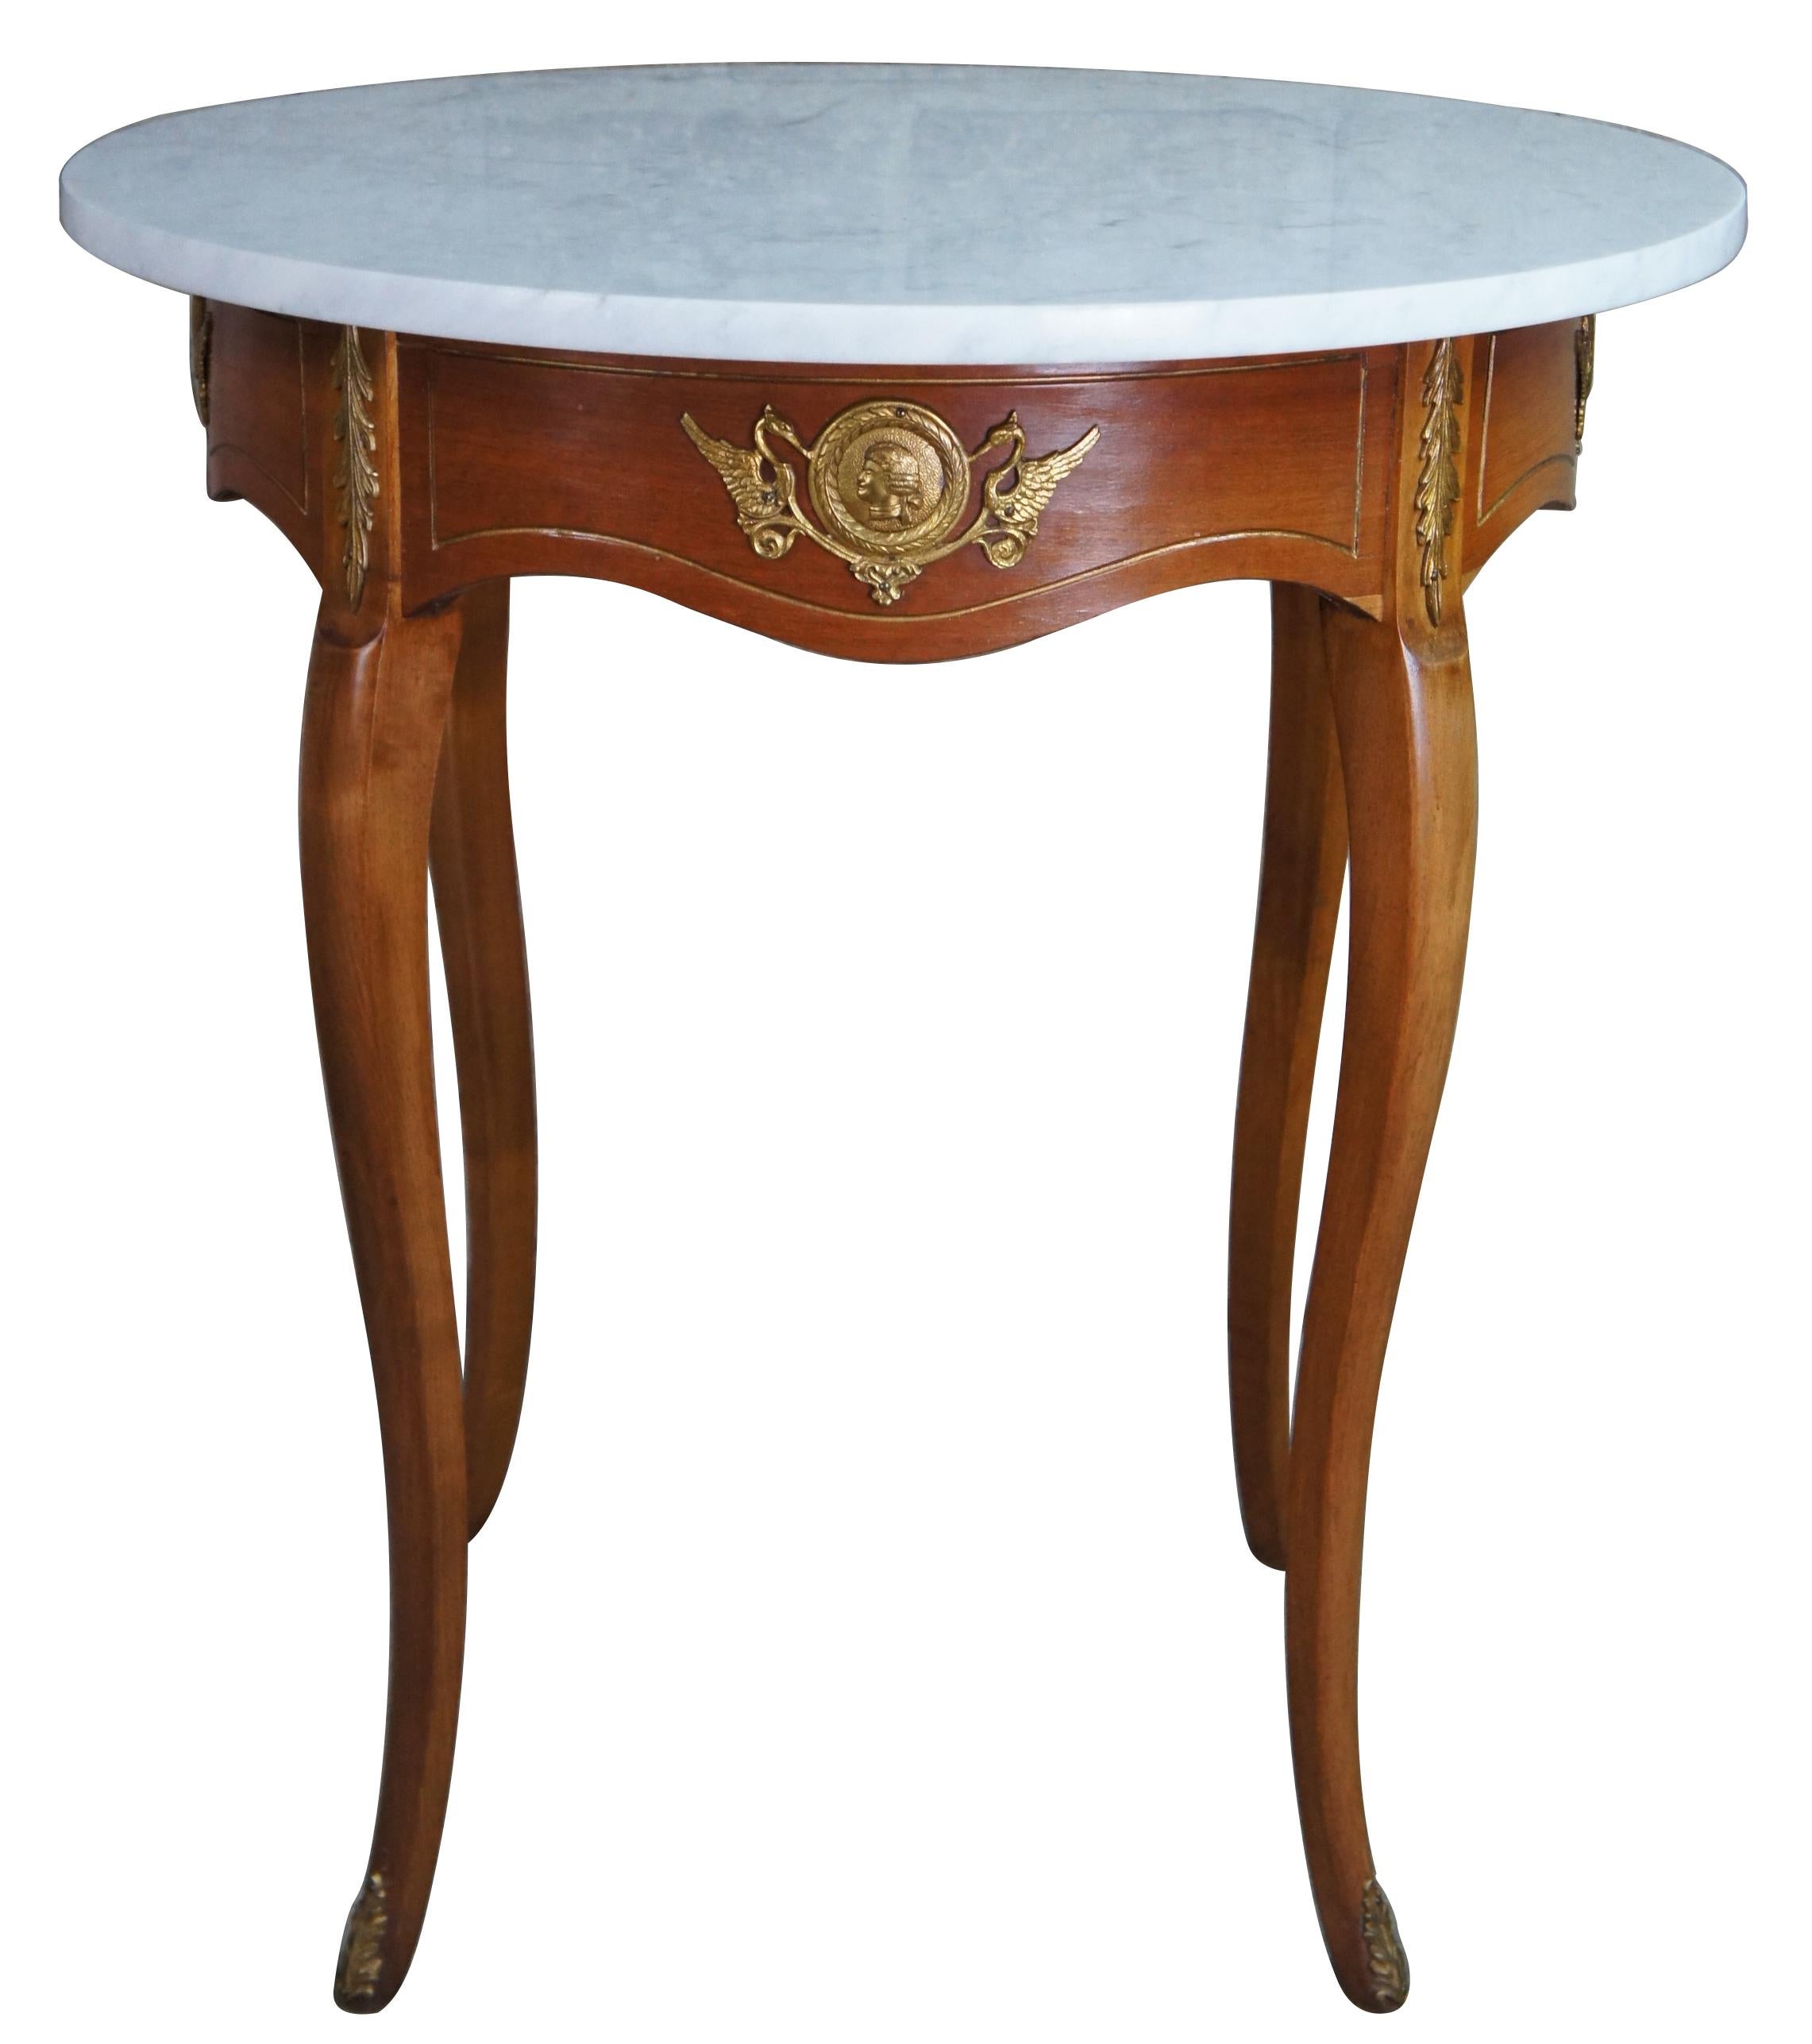 Two antique Italian Neoclassical Gueridon tables. Made of fruitwood with gold medallions that feature a bust of a mans head surrounded by a wreath flanked by swans / birds. Accanthus accents and feet caps adorn the serpentine legs. Original marble